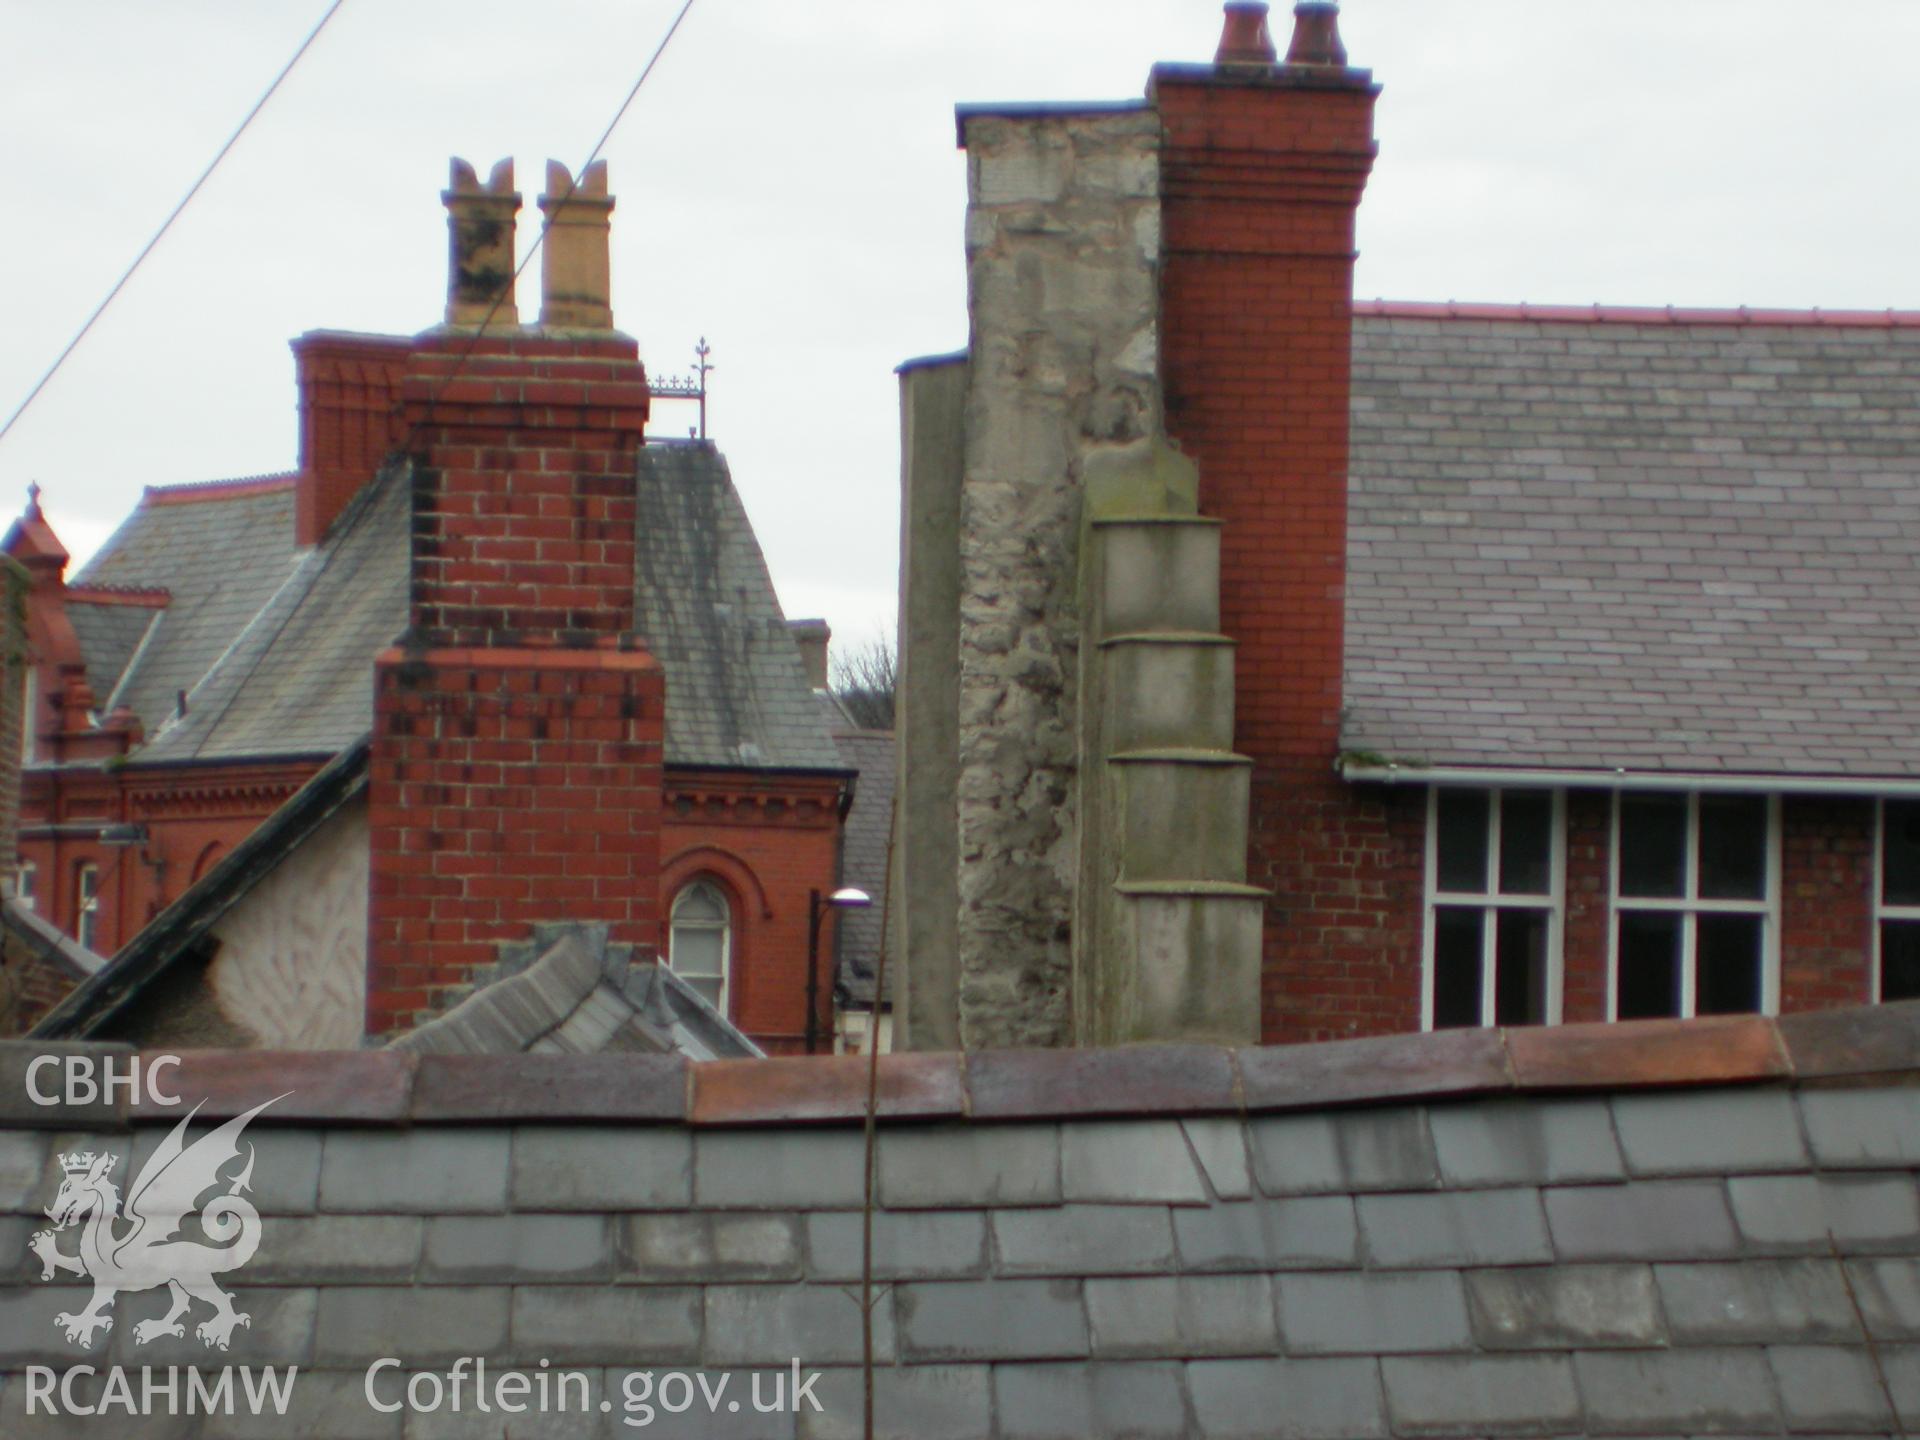 Stone chimney to hall against post office building.